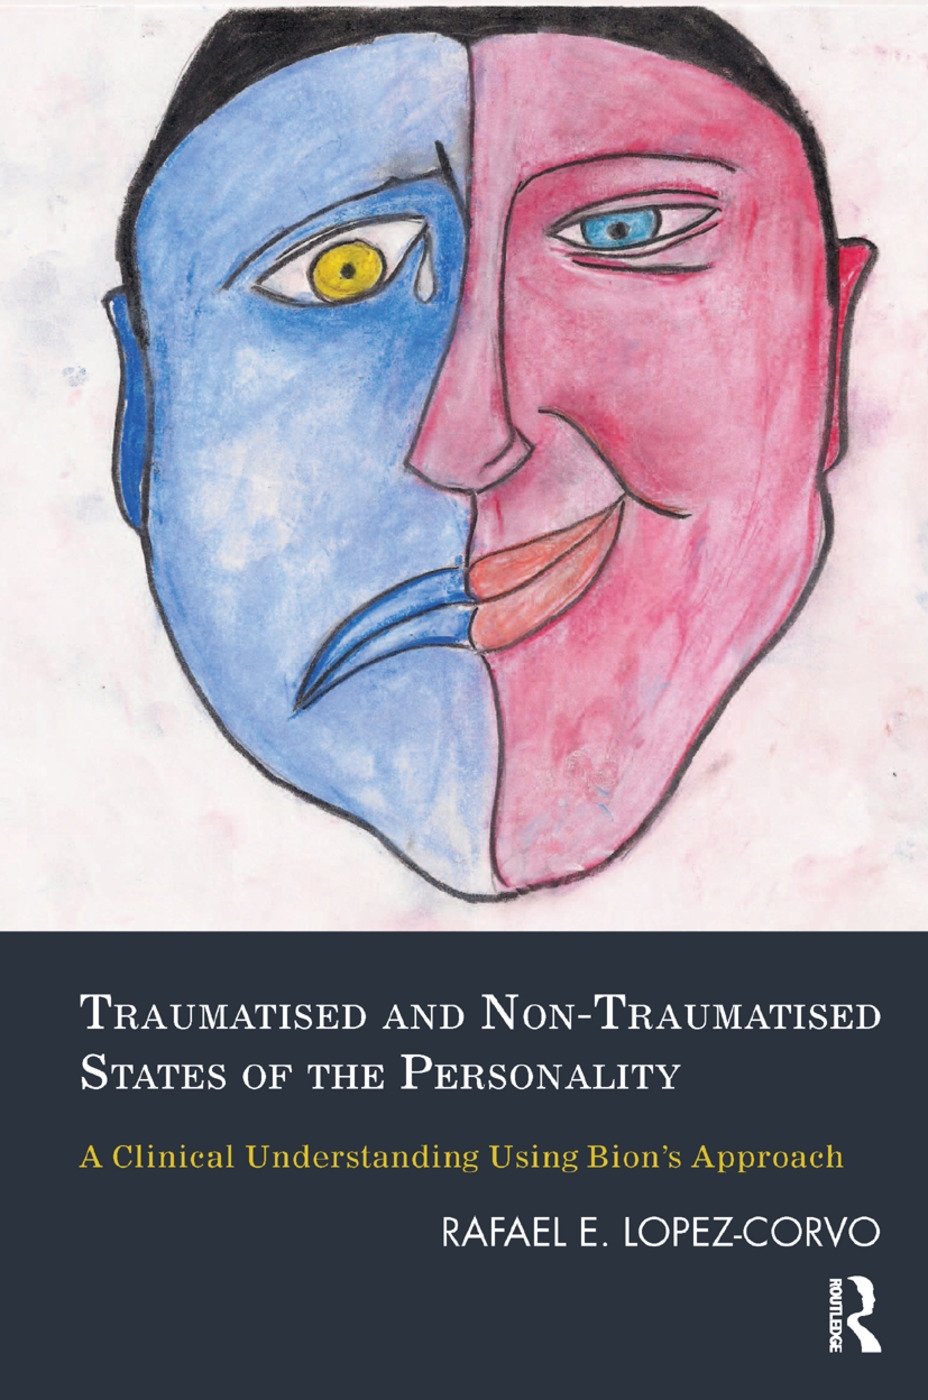 Traumatised and Non-Traumatised States of the Personality: A Clinical Understanding Using Bion’s Approach